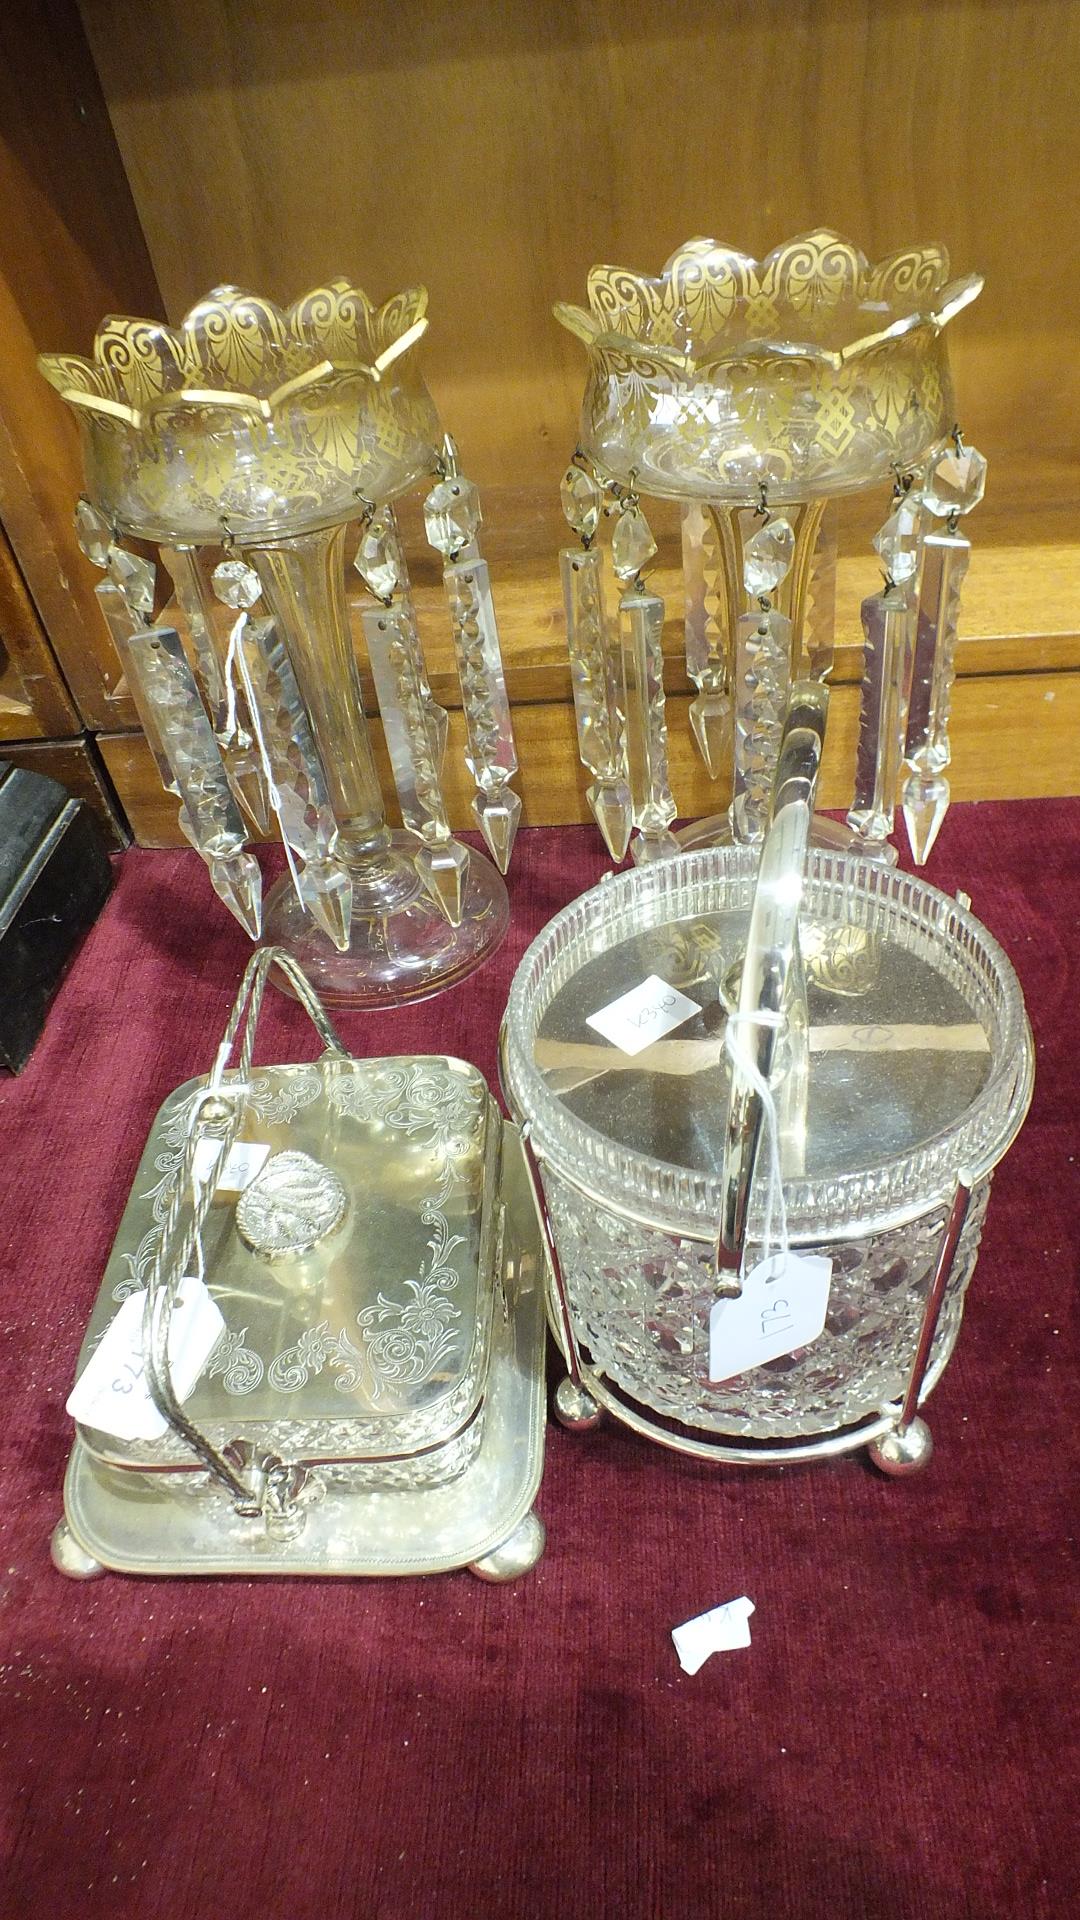 An electro-plated sardine dish stand with cut-glass dish, a cut glass biscuit barrel on plated stand